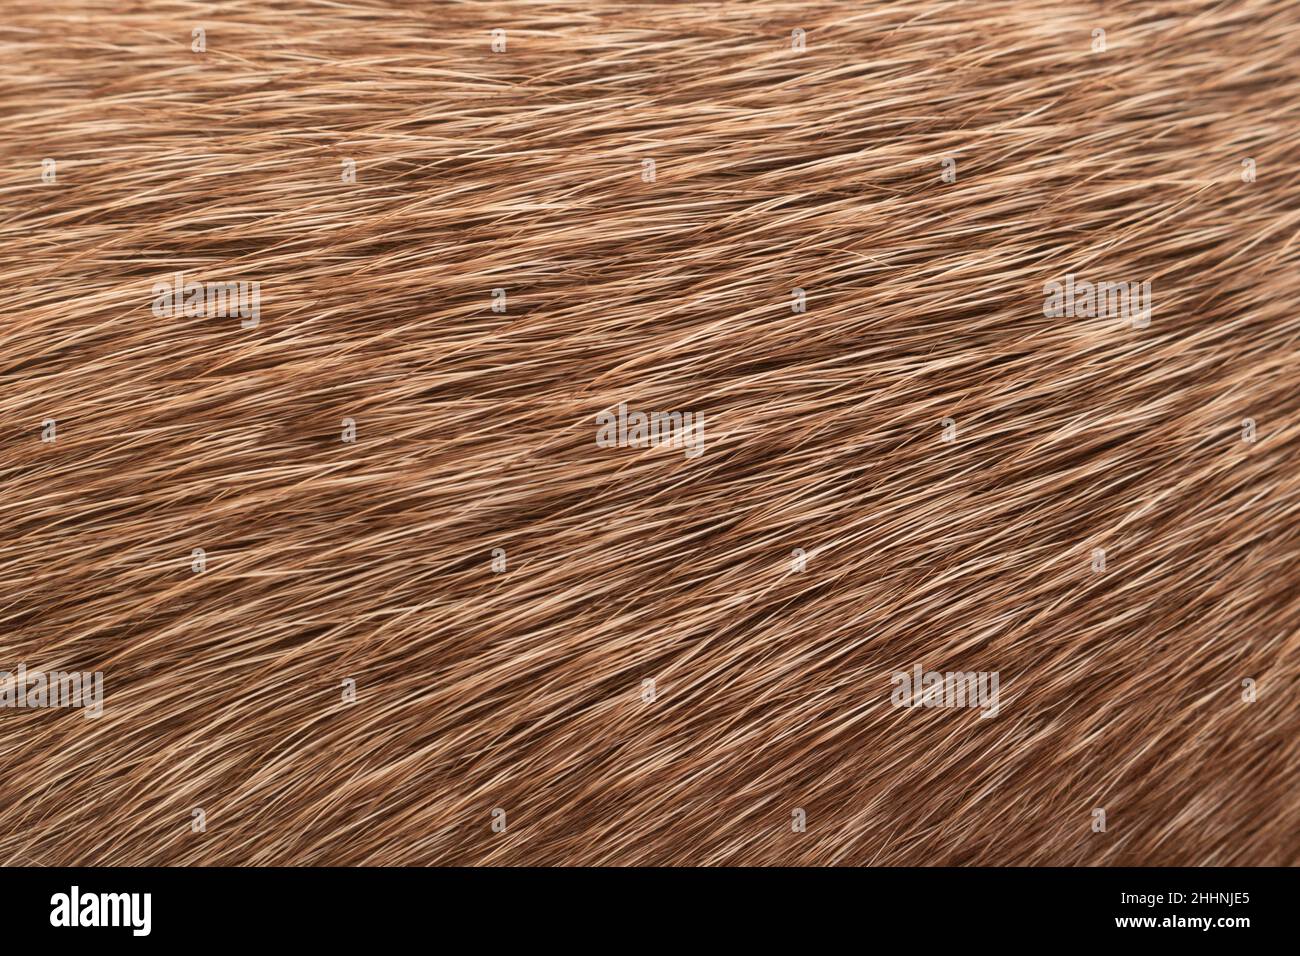 Texture of fur. Close-up of light brown mixed-breed dog's fur. Macro photography Stock Photo